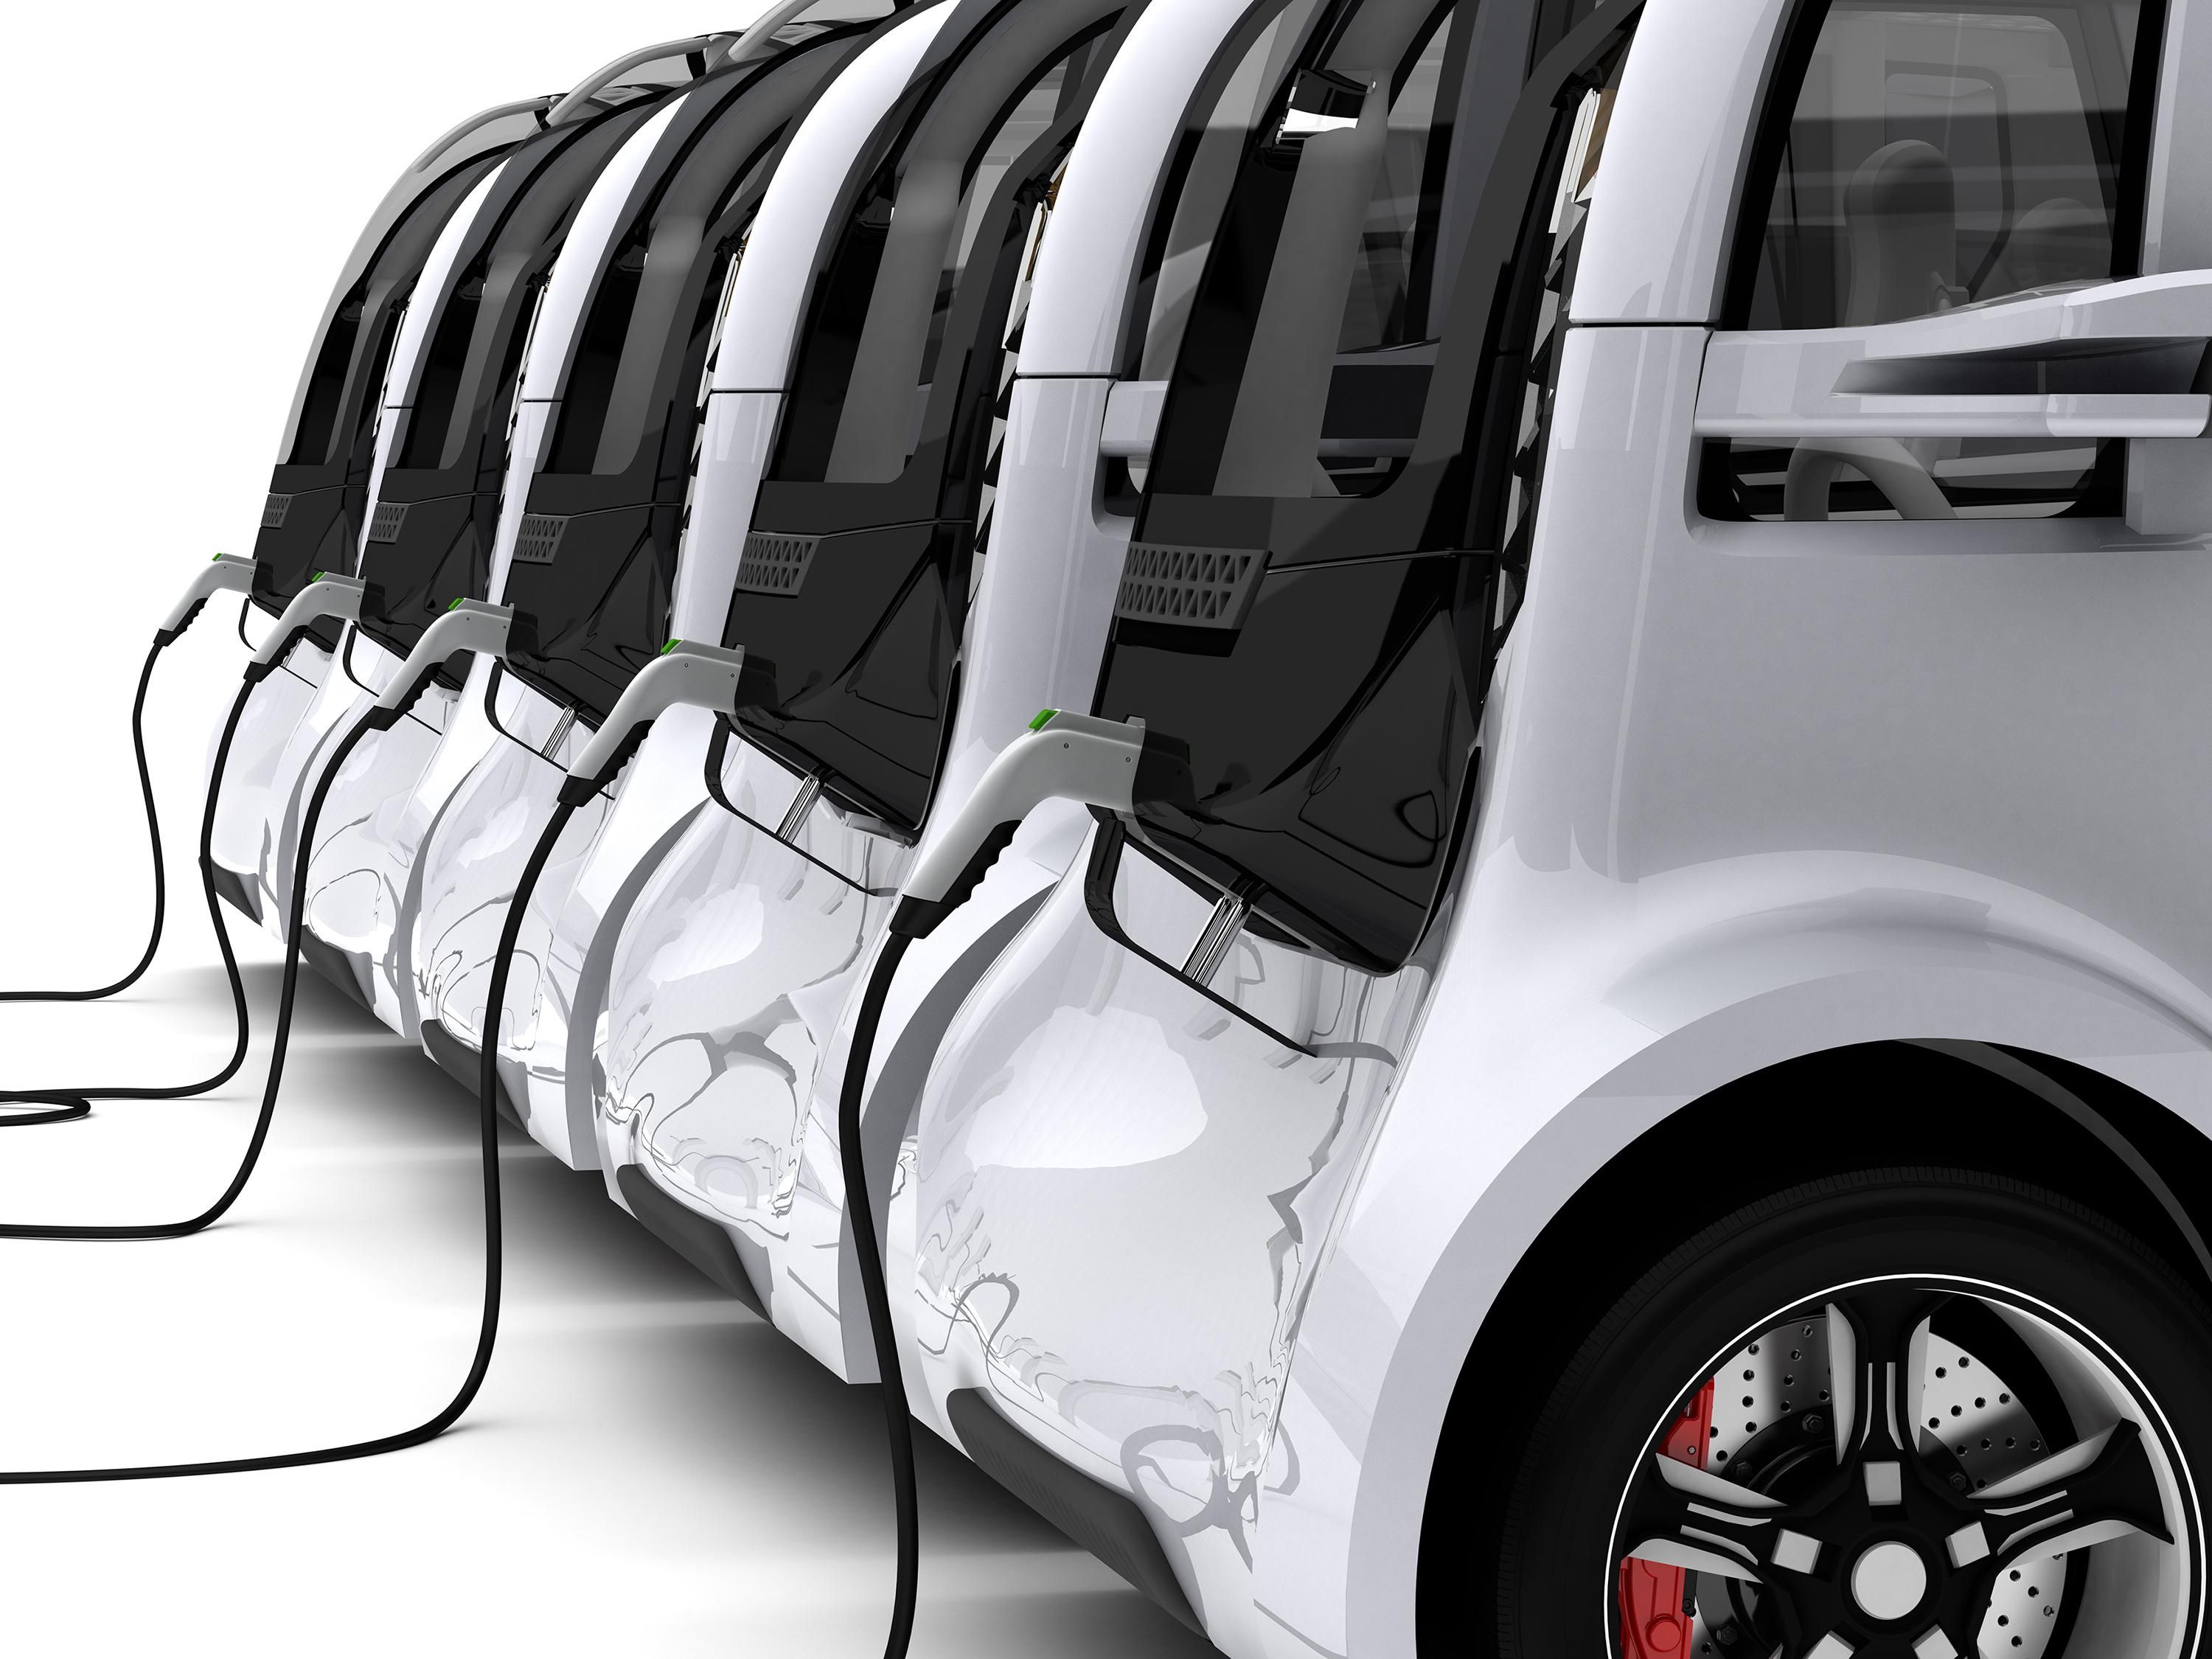 A row of gray and black electric cars, with plugs running from their rear off to the left side of the image.